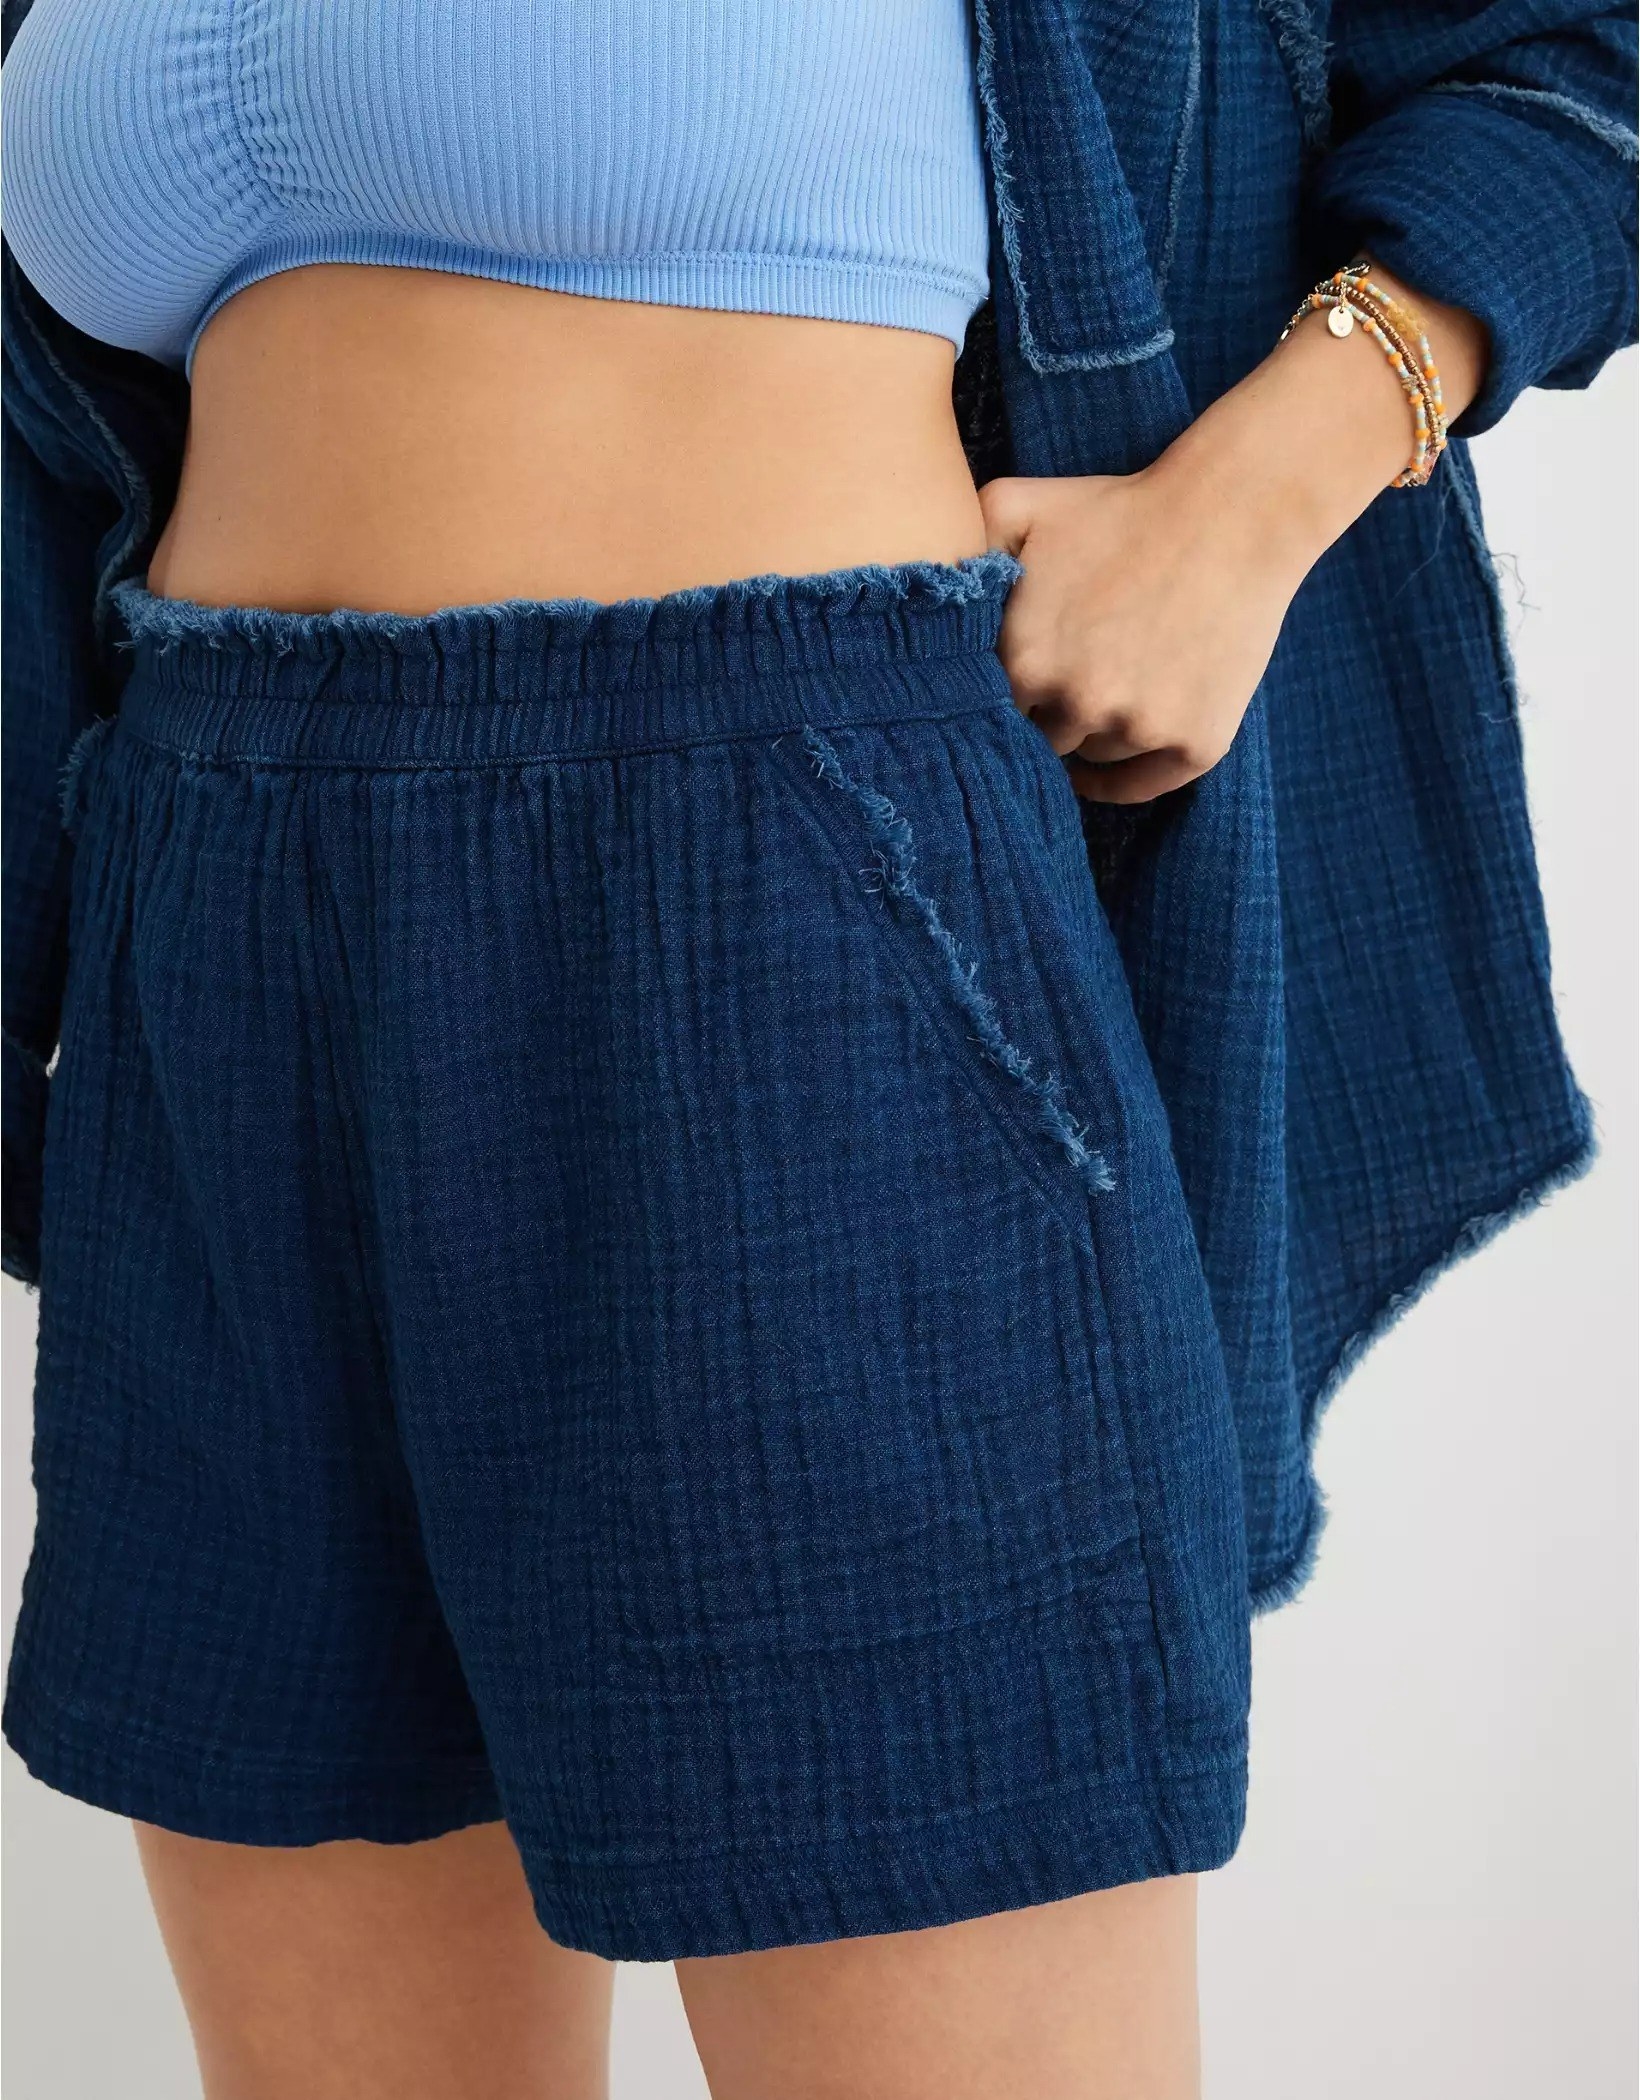 A picture of the lower half of the model wearing the shorts in blue